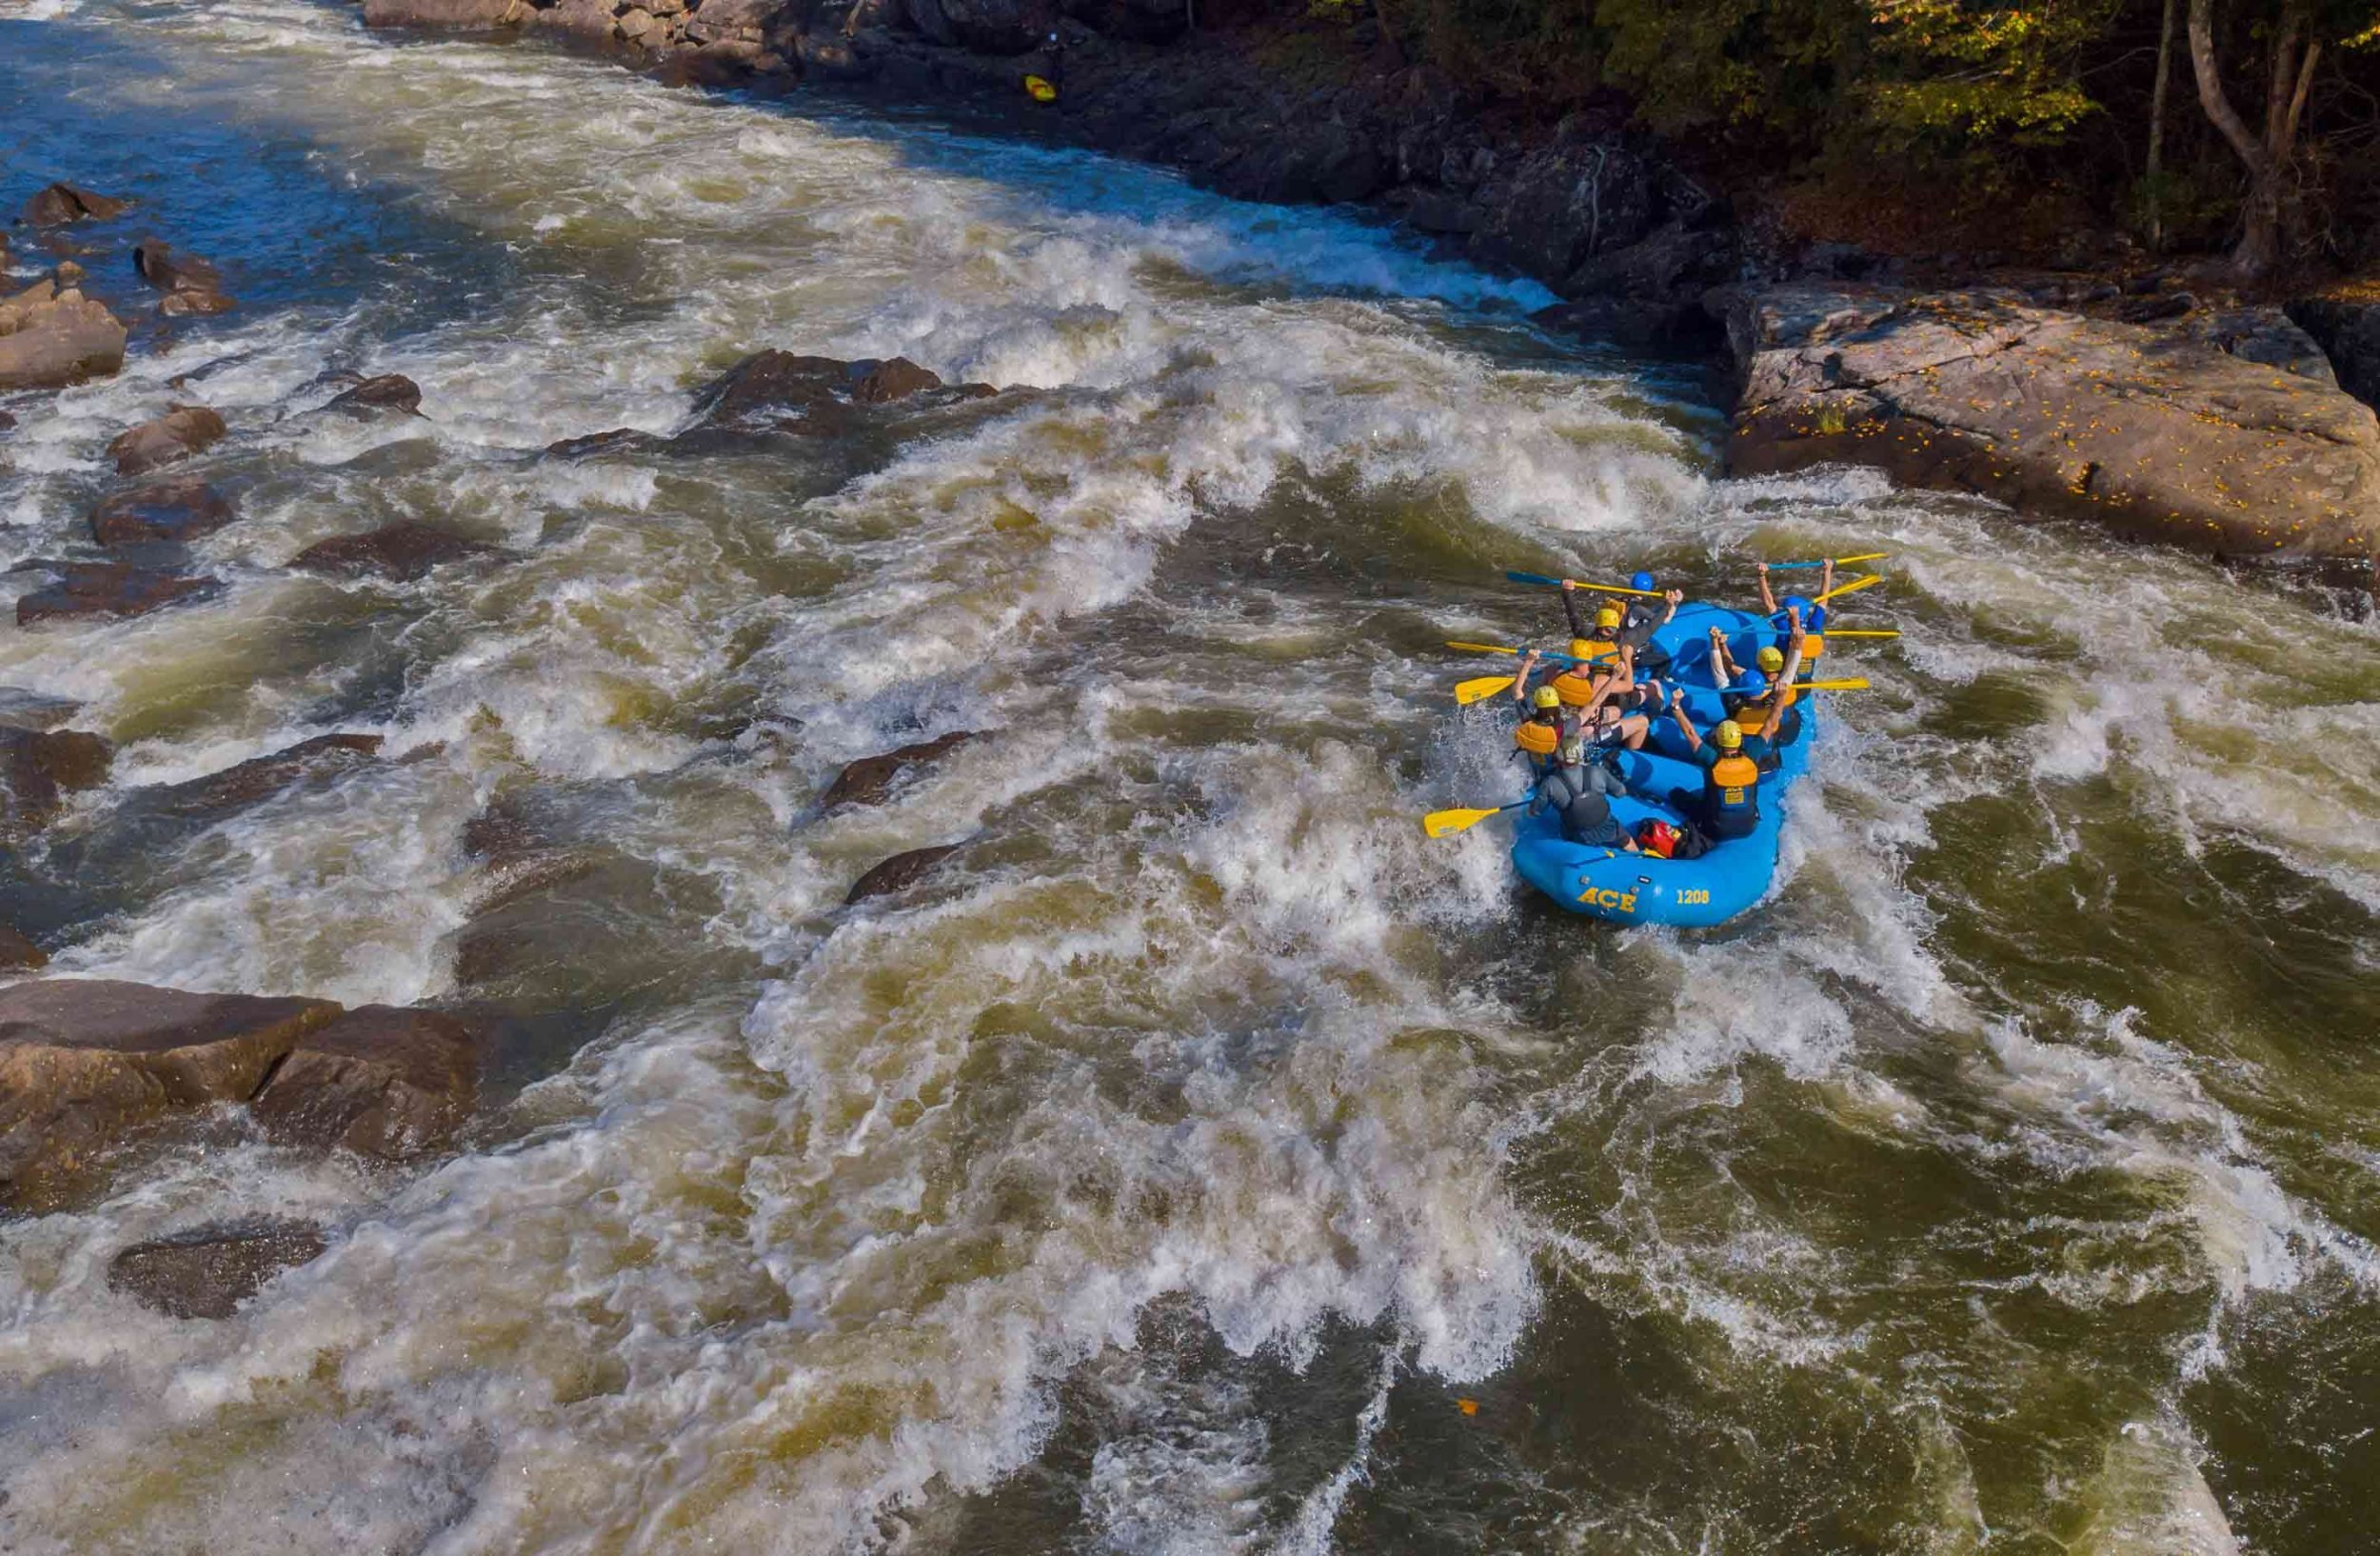 A 6 person raft appears tiny in the massive waves of the Upper Gauley on a Gauley River rafting trip with ACE Adventure Resort.